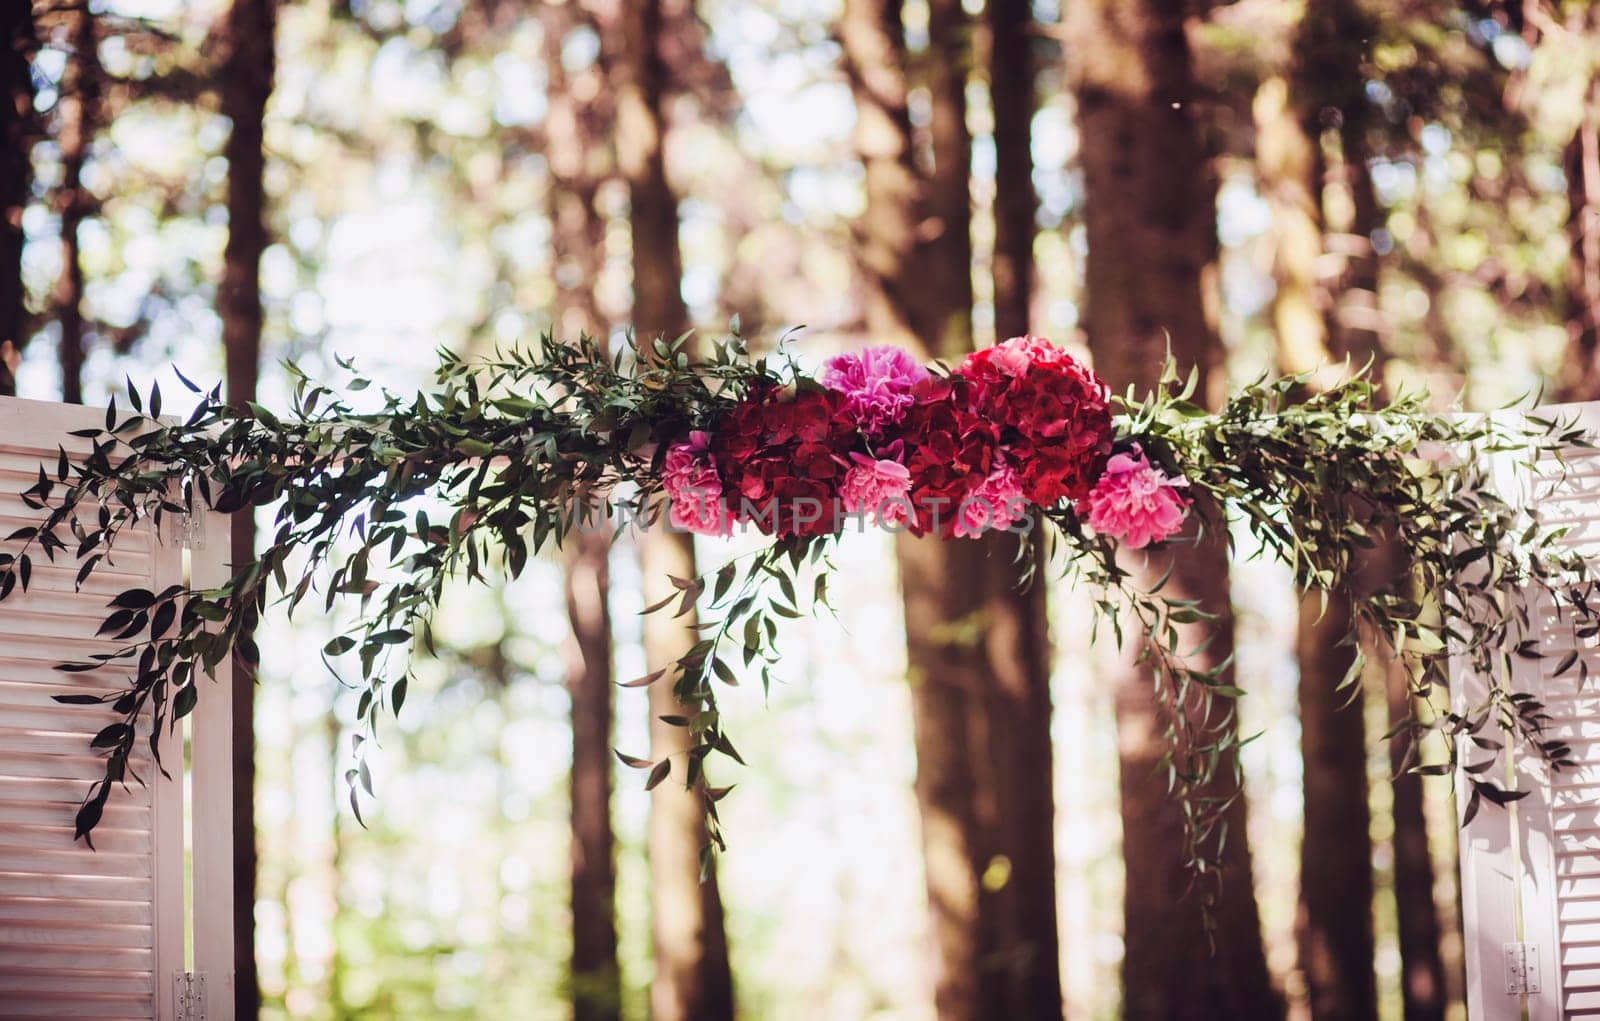 Beautiful white wedding arch decorated with bright flowers outdoors